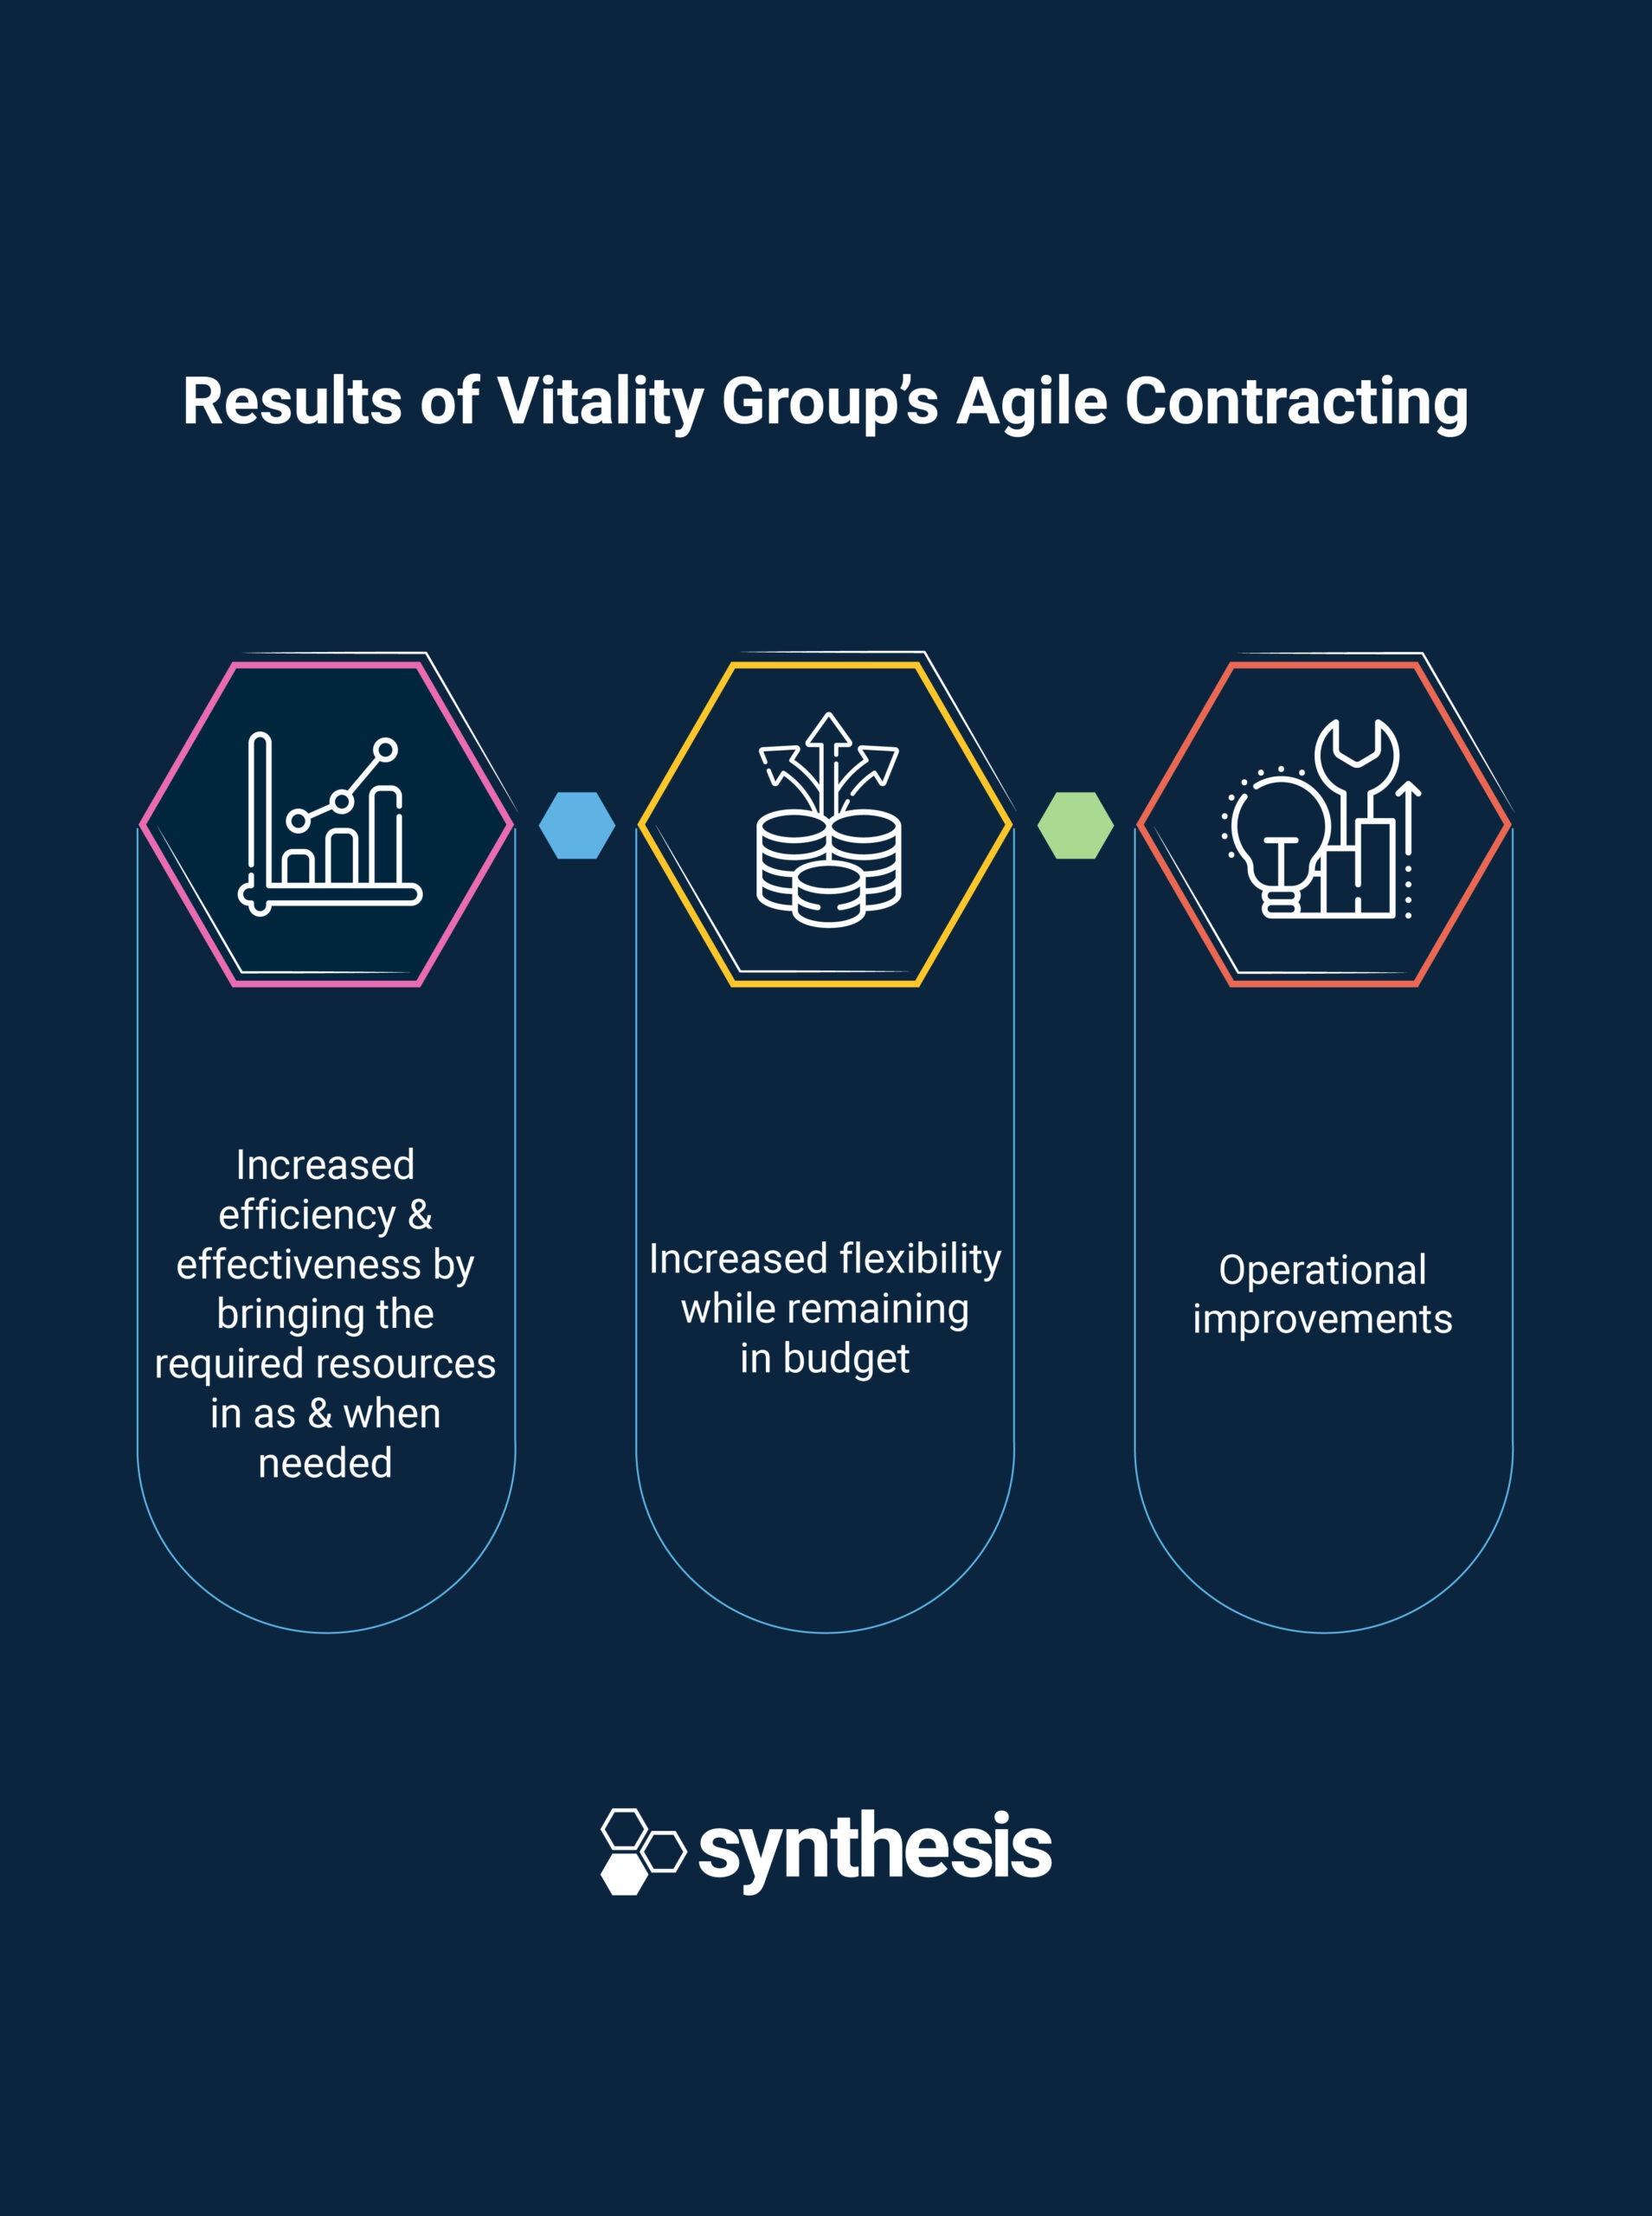 Vitality Group Sets a New Pace with Agile Contracting